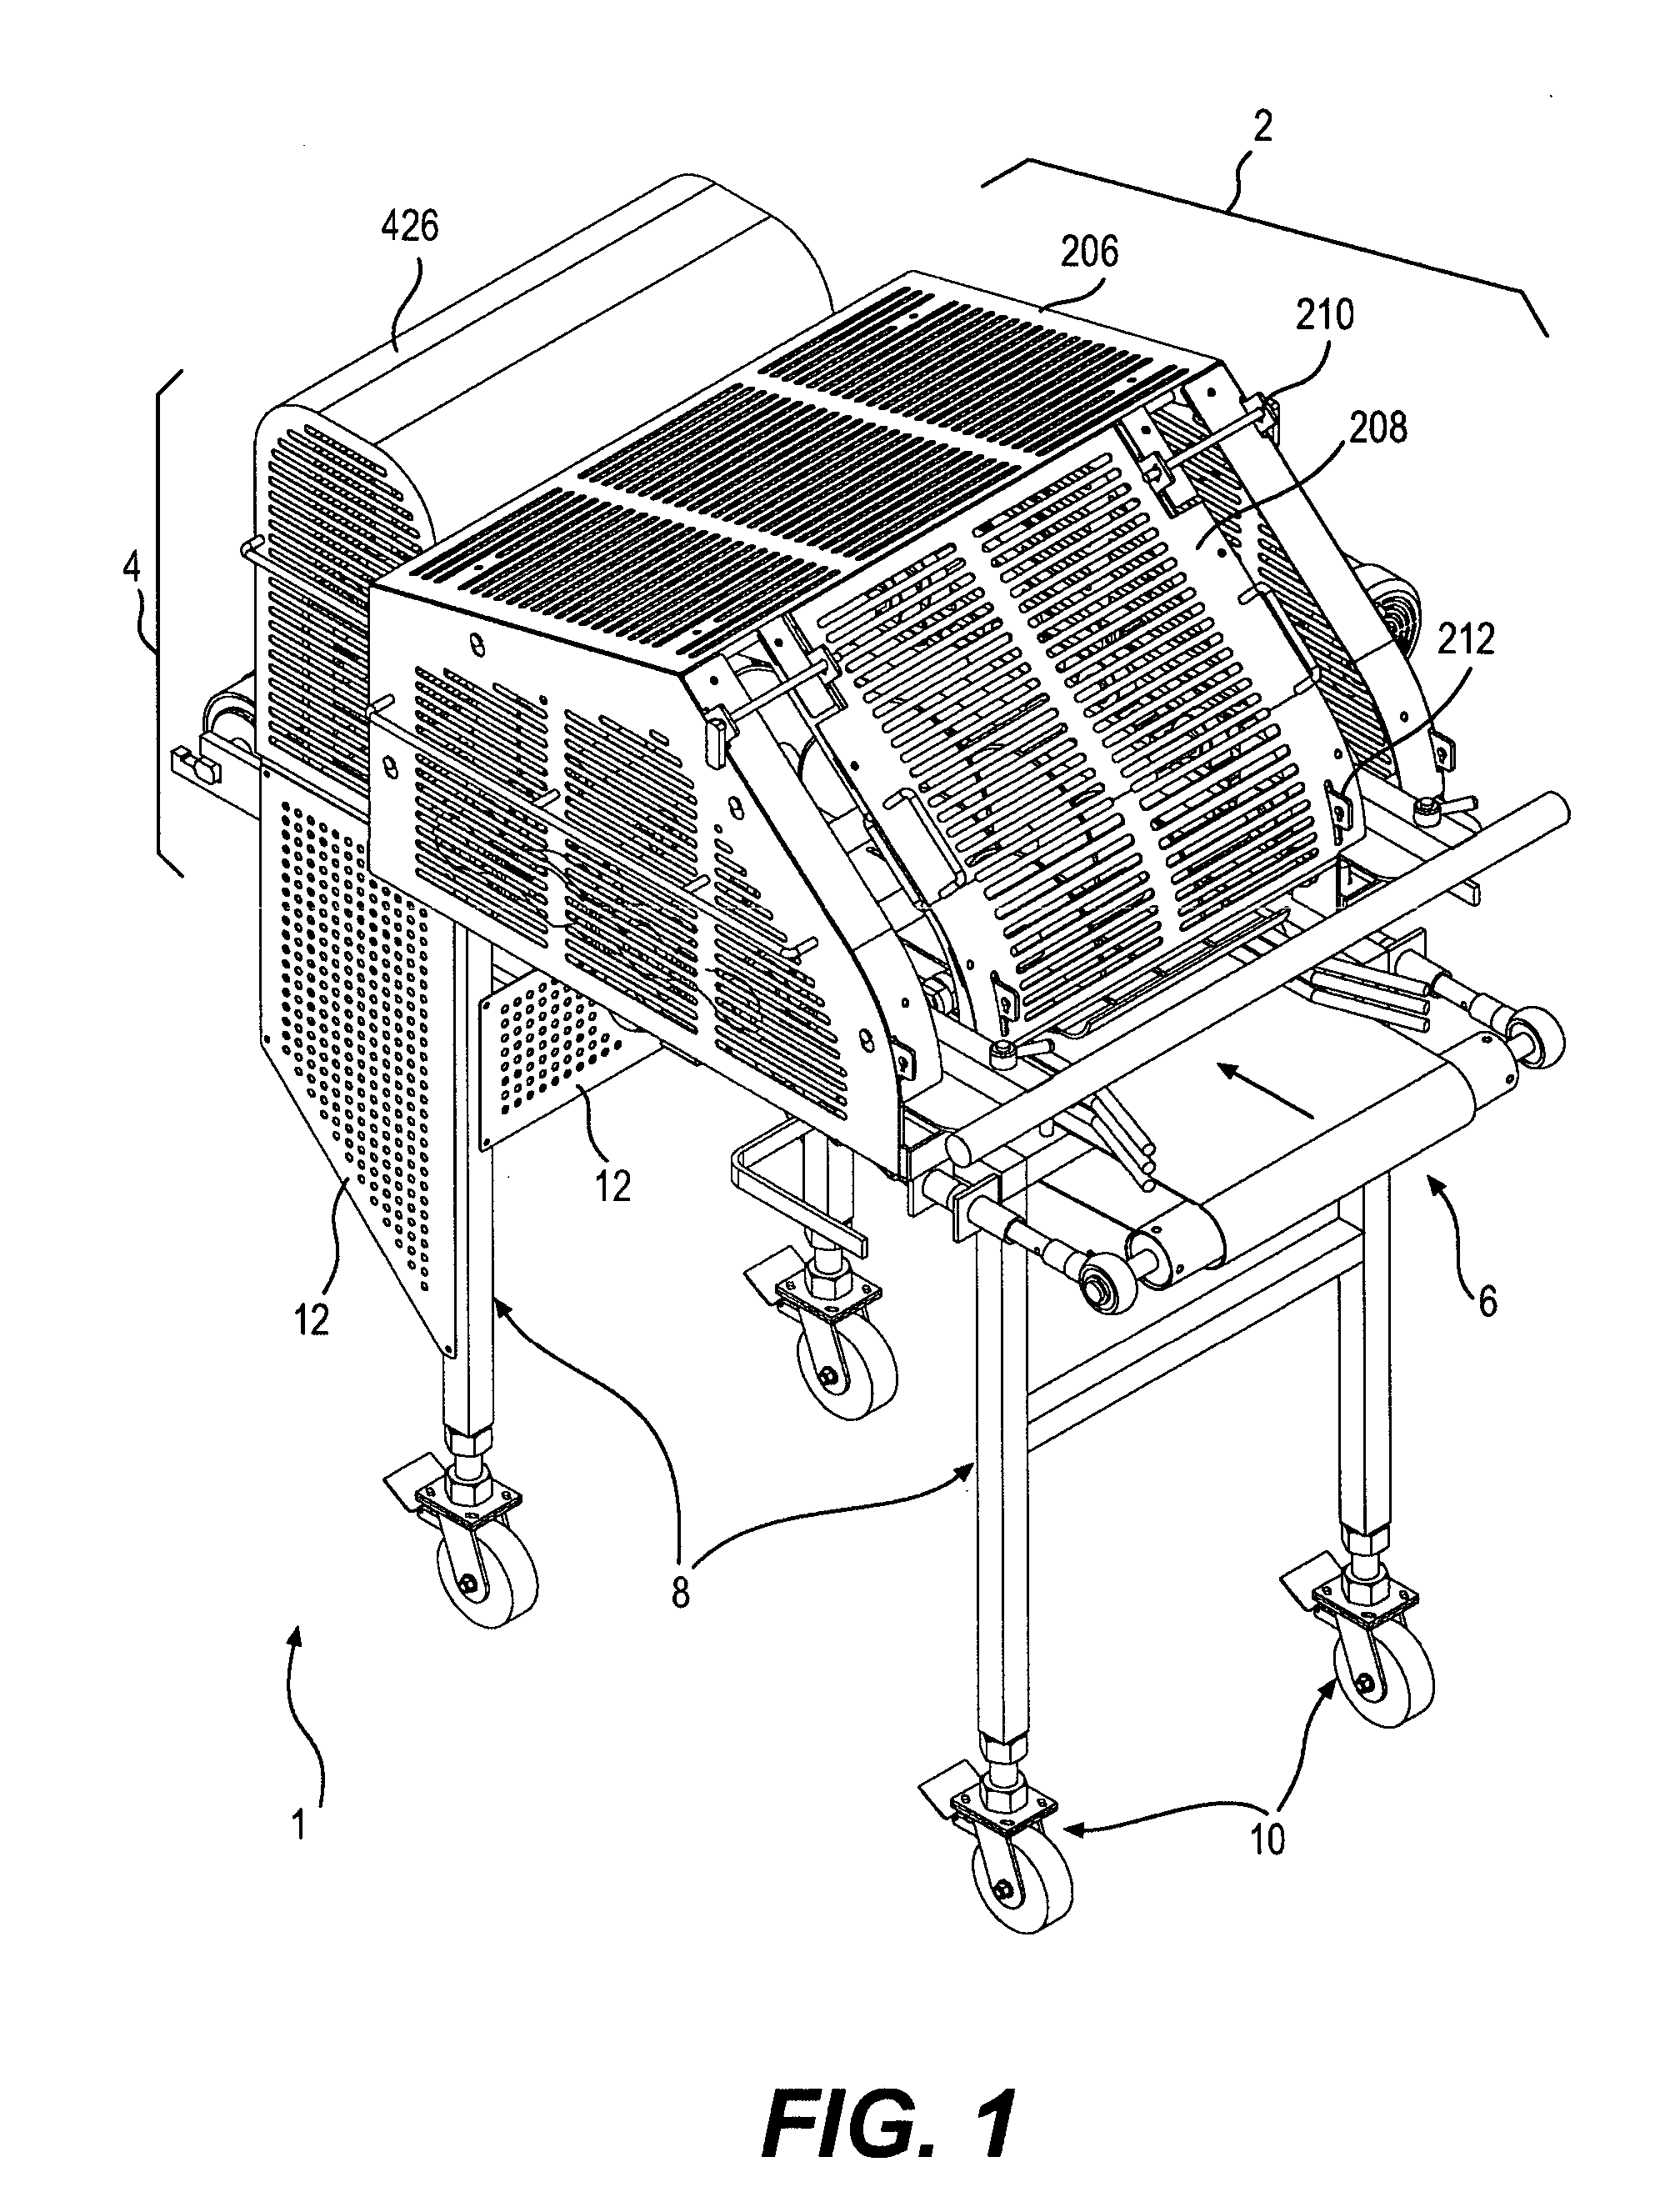 Apparatus for dicing a deformable product